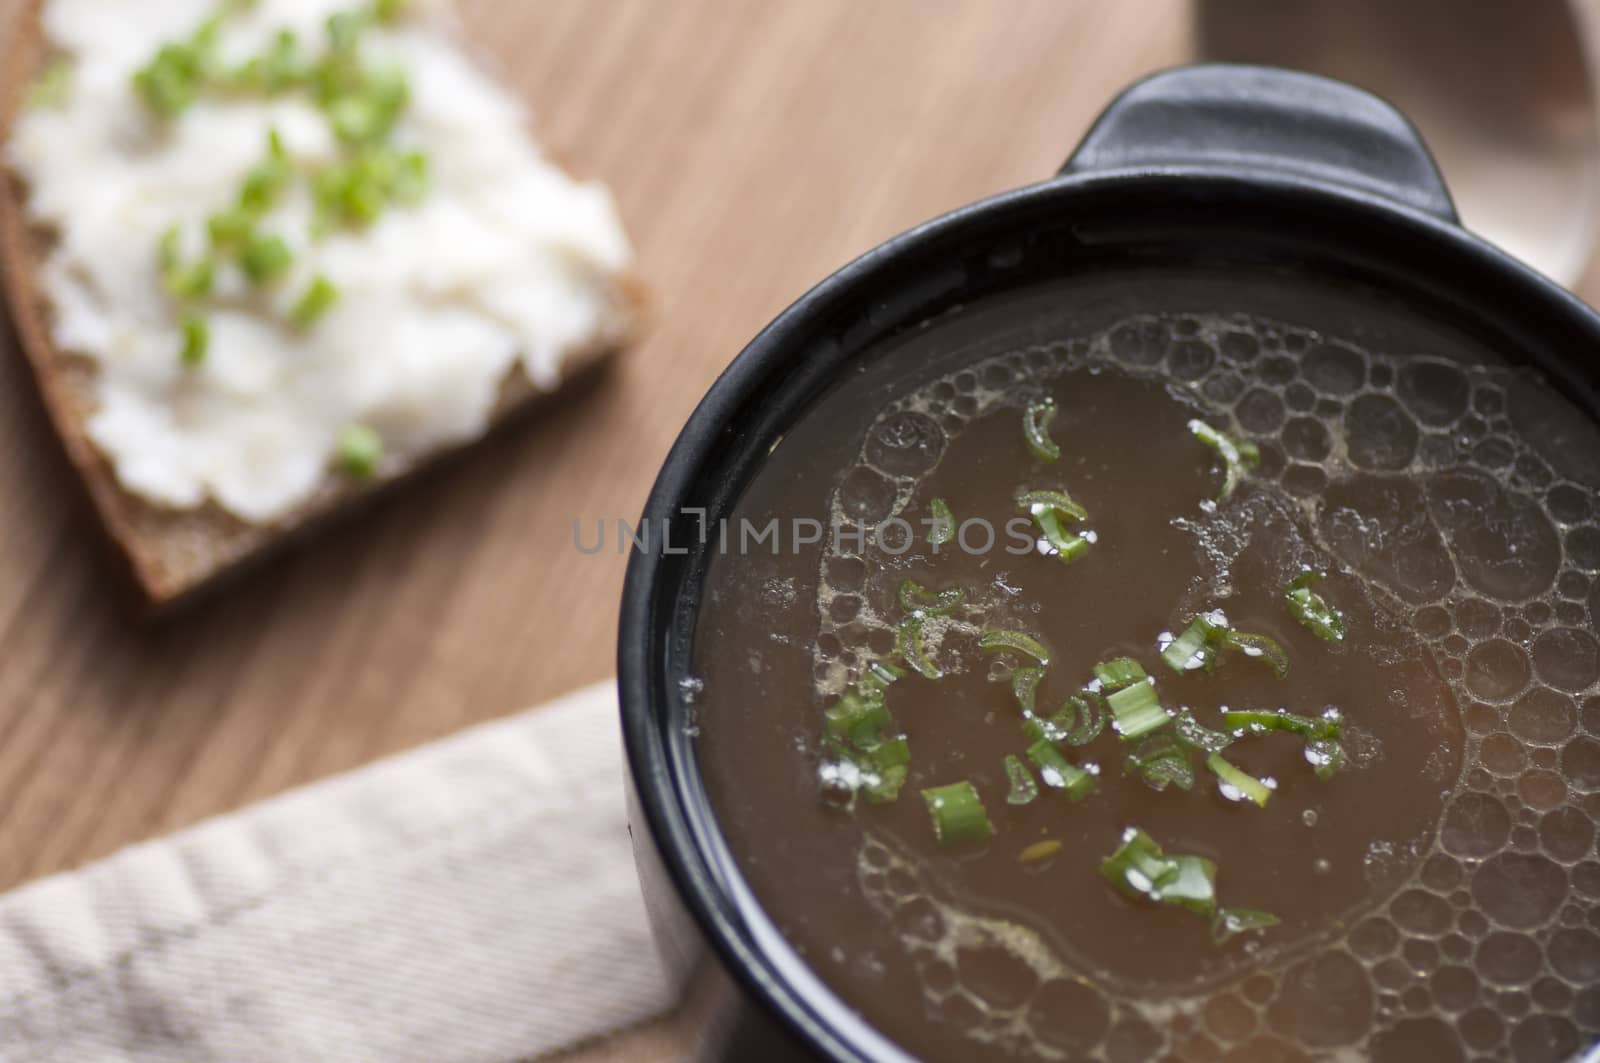 Mushroom soup served with lard spread on rye bread with green onion view from above